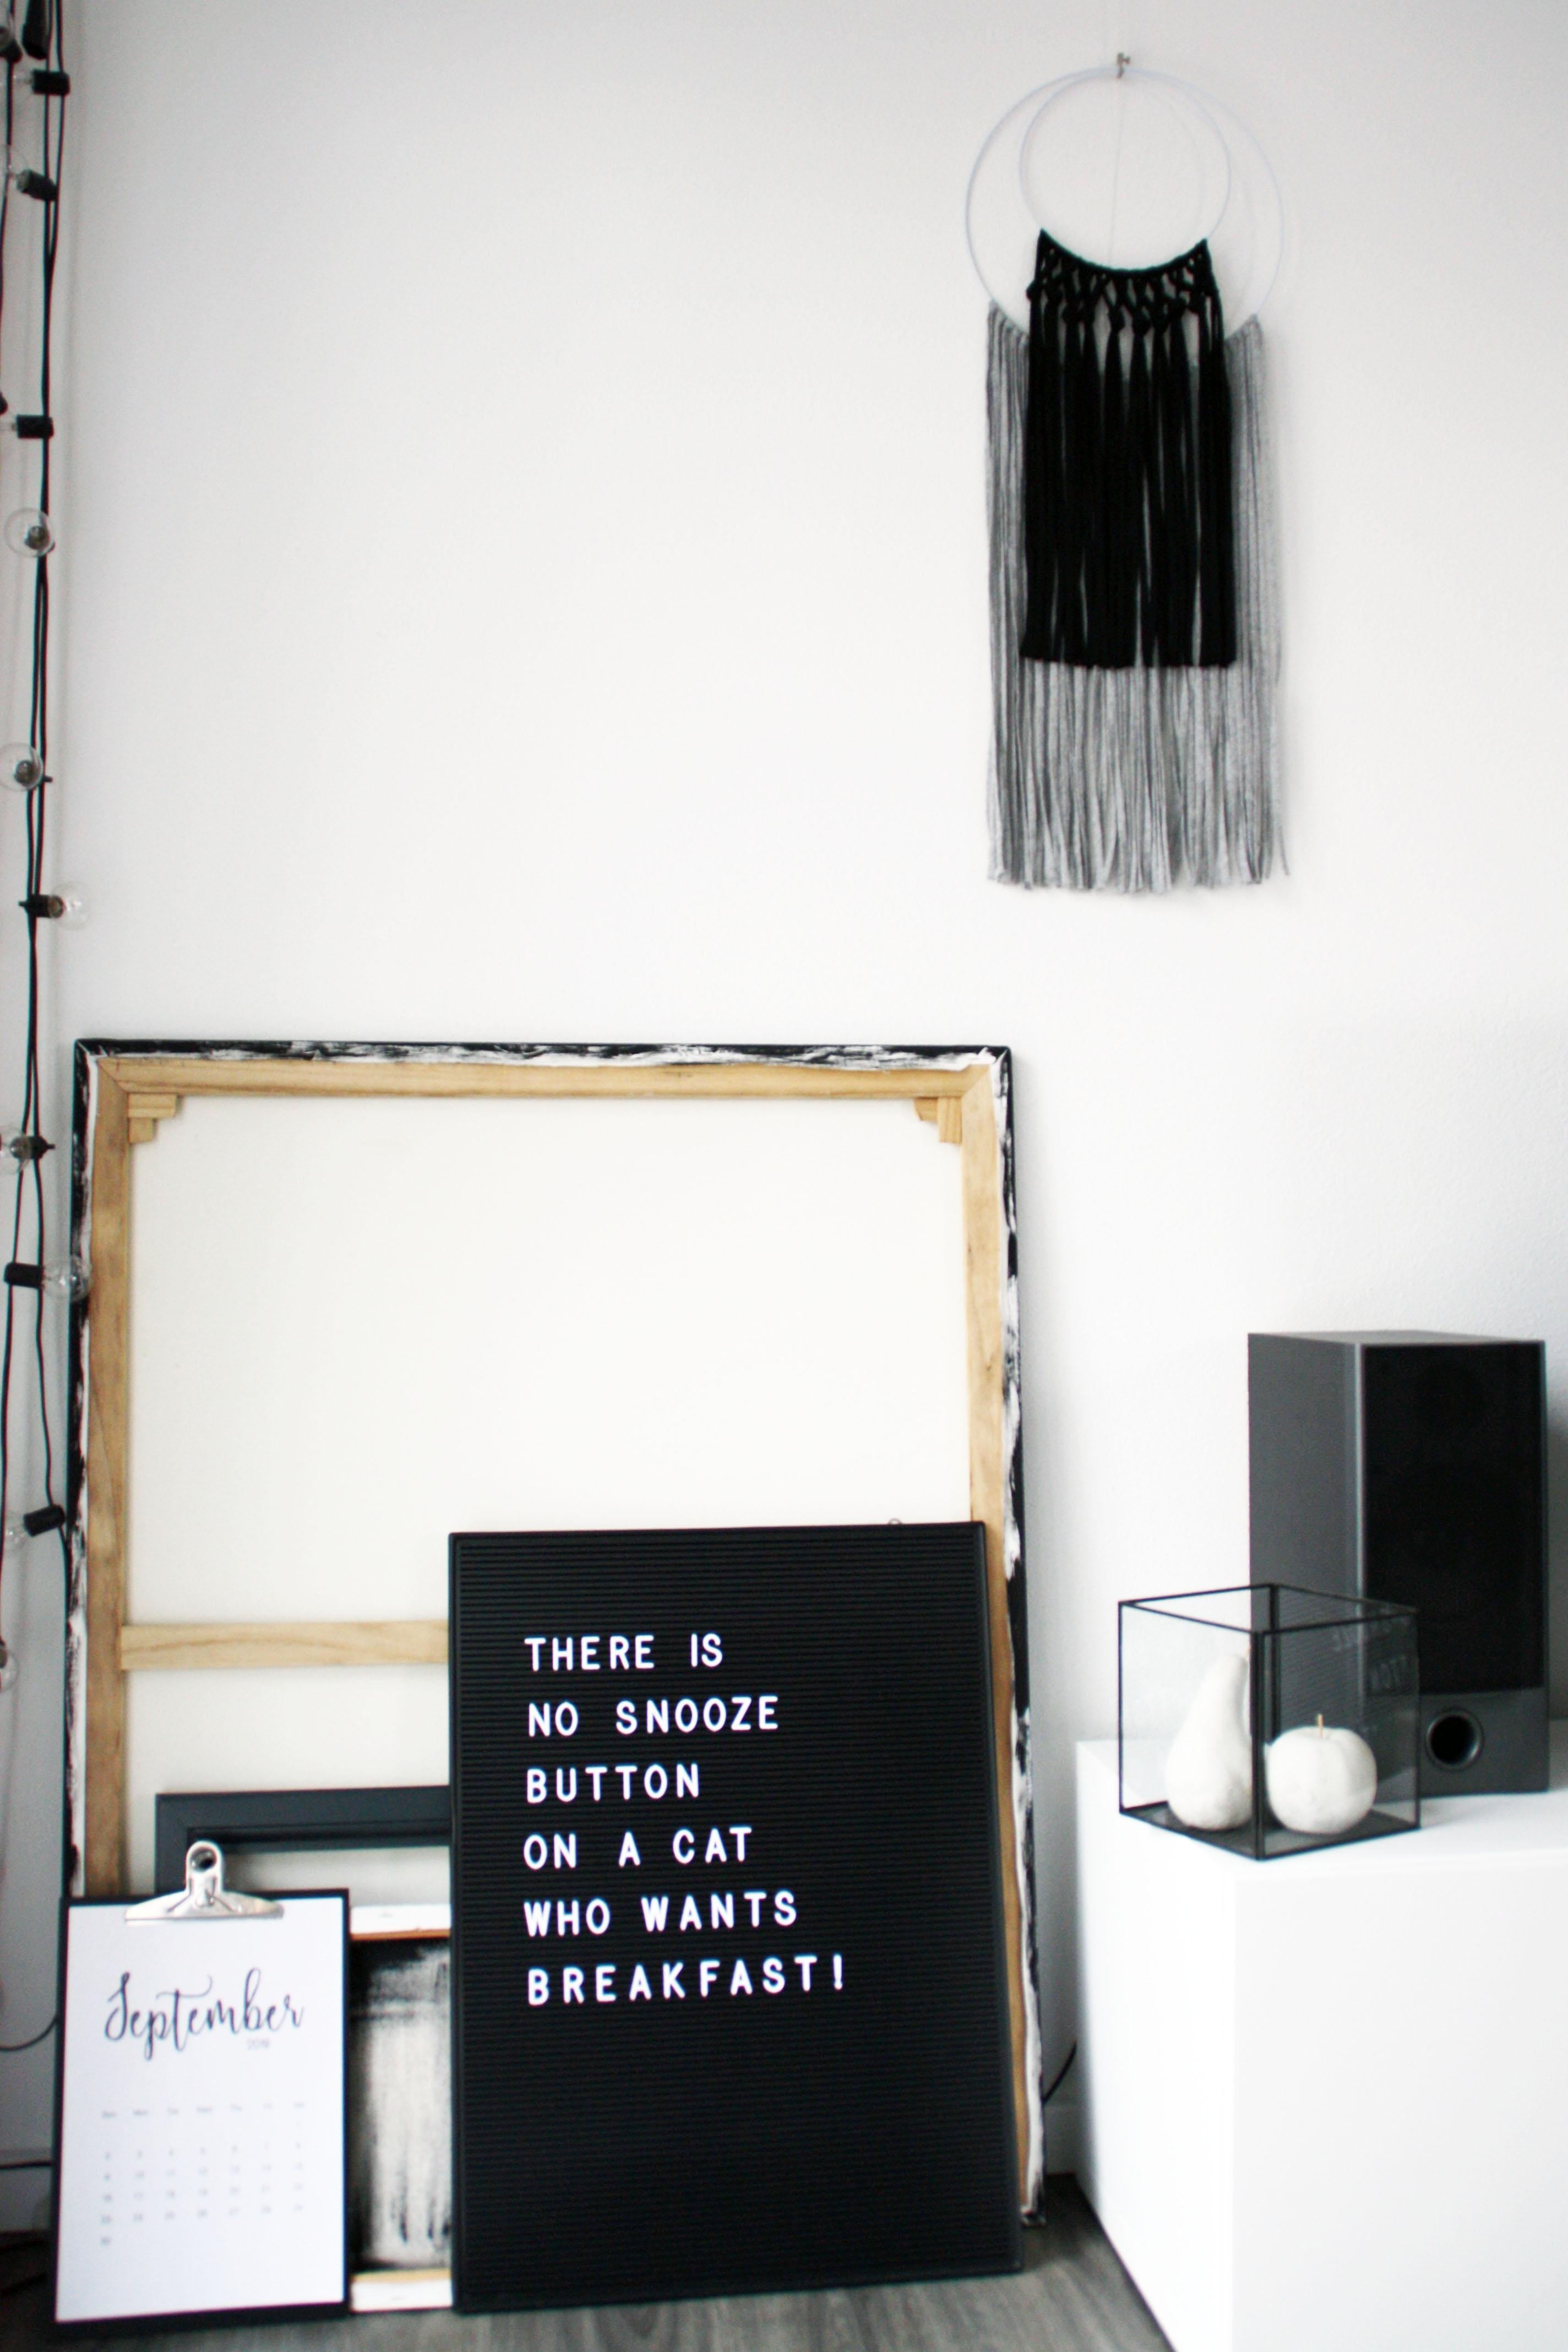 wallHANGING

#wandbehang #diy #wallhanging #selbstgemacht #greycrownhome #blackandwhite #living #wohnen #letterboard